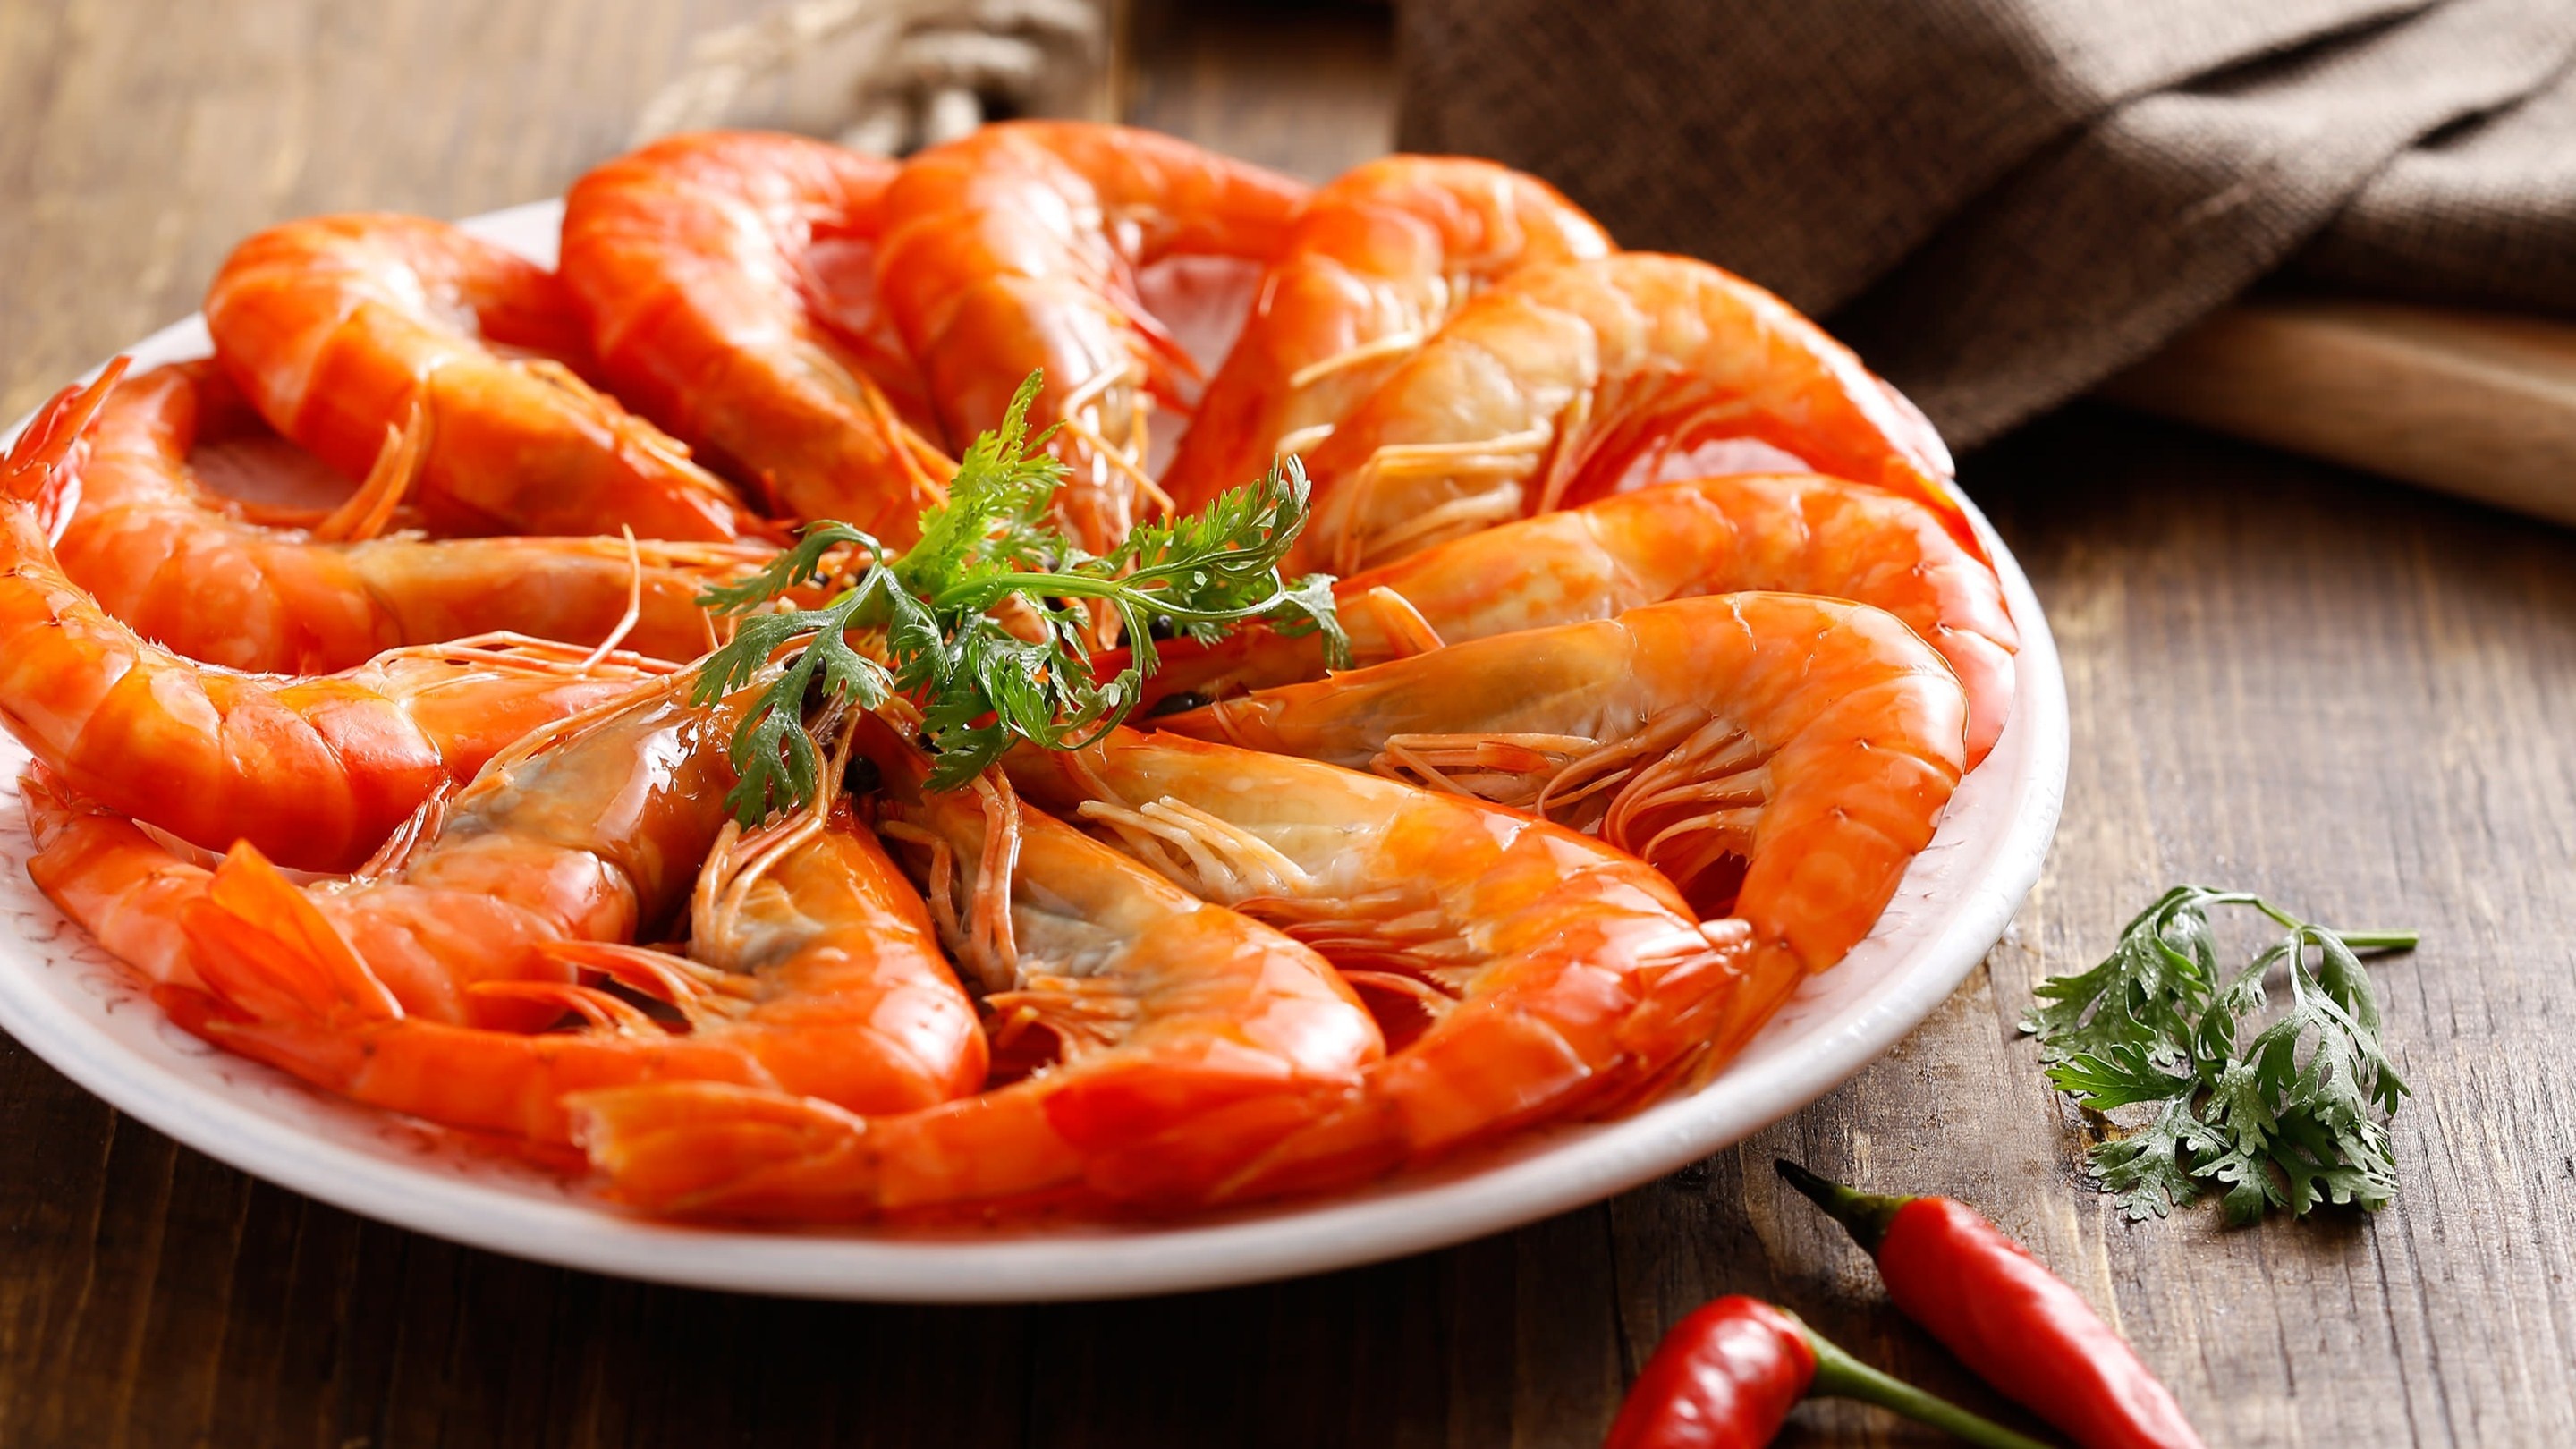 Seafood: A crustacean with an elongated body, A form of shellfish. 2880x1620 HD Wallpaper.